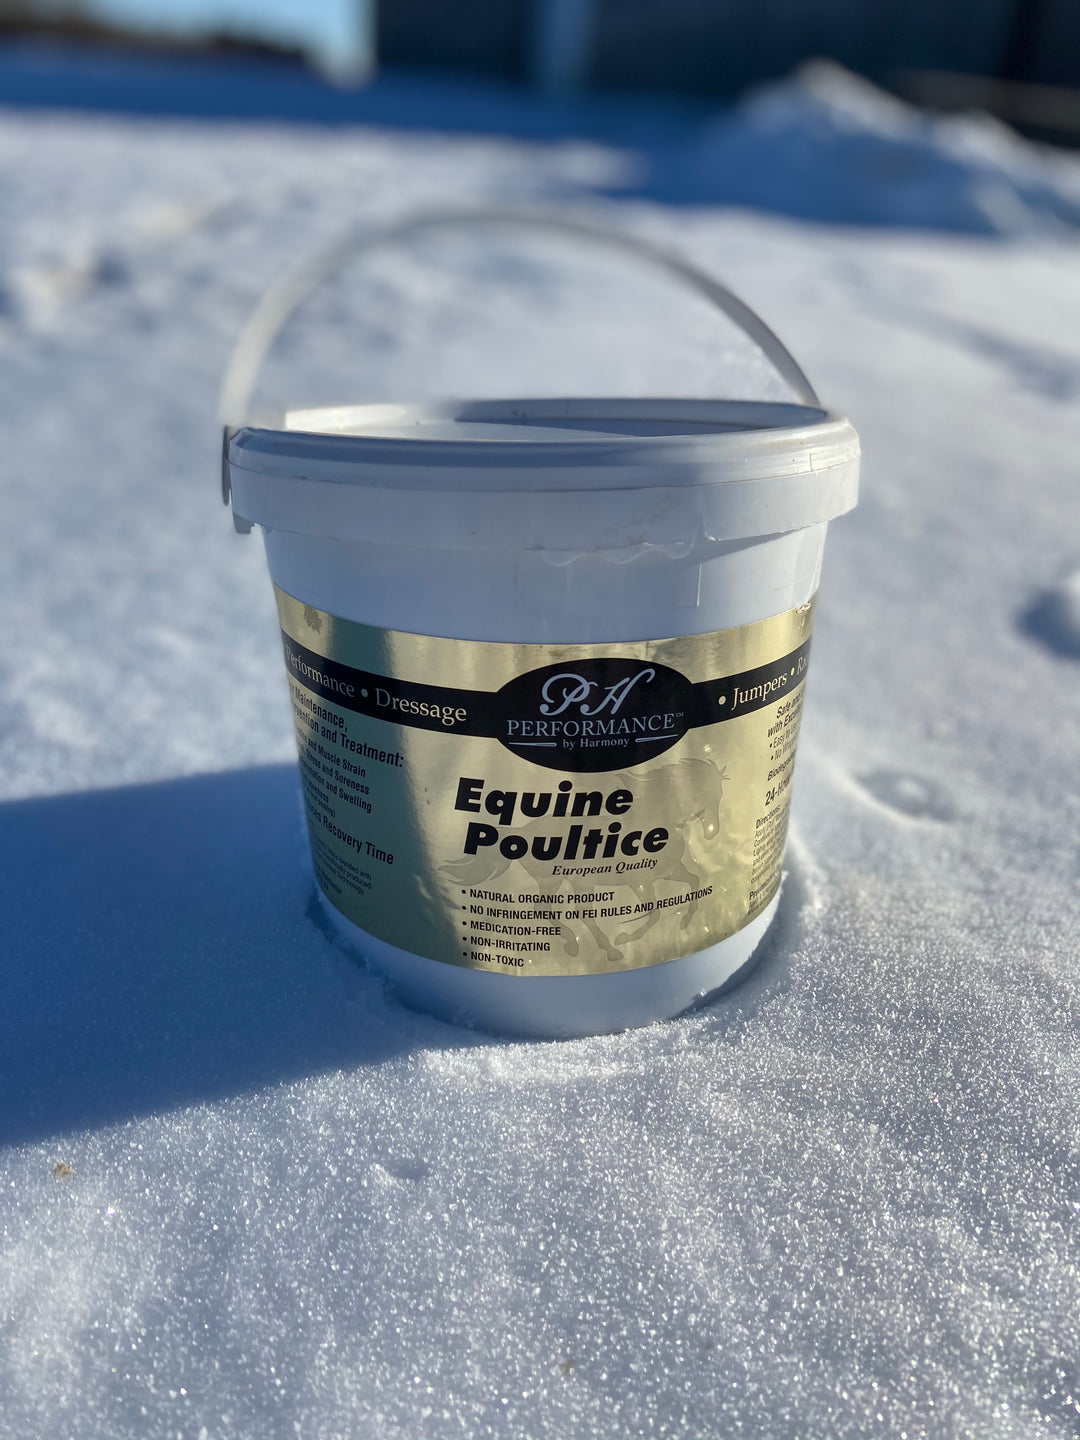 Equine Poultice